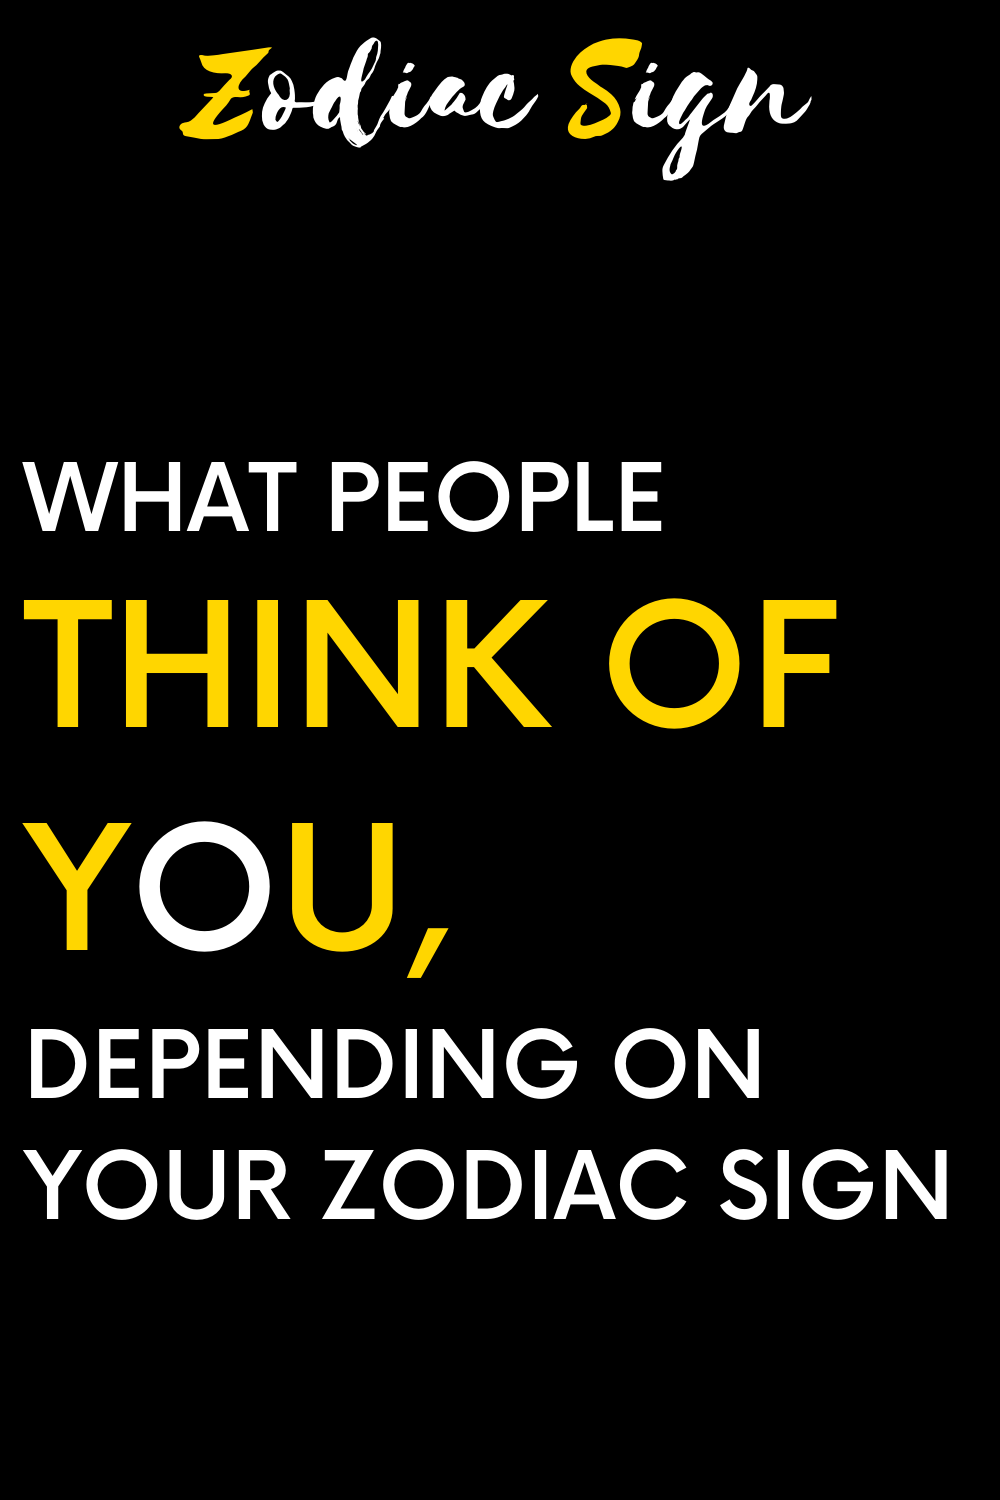 What people think of you, depending on your zodiac sign